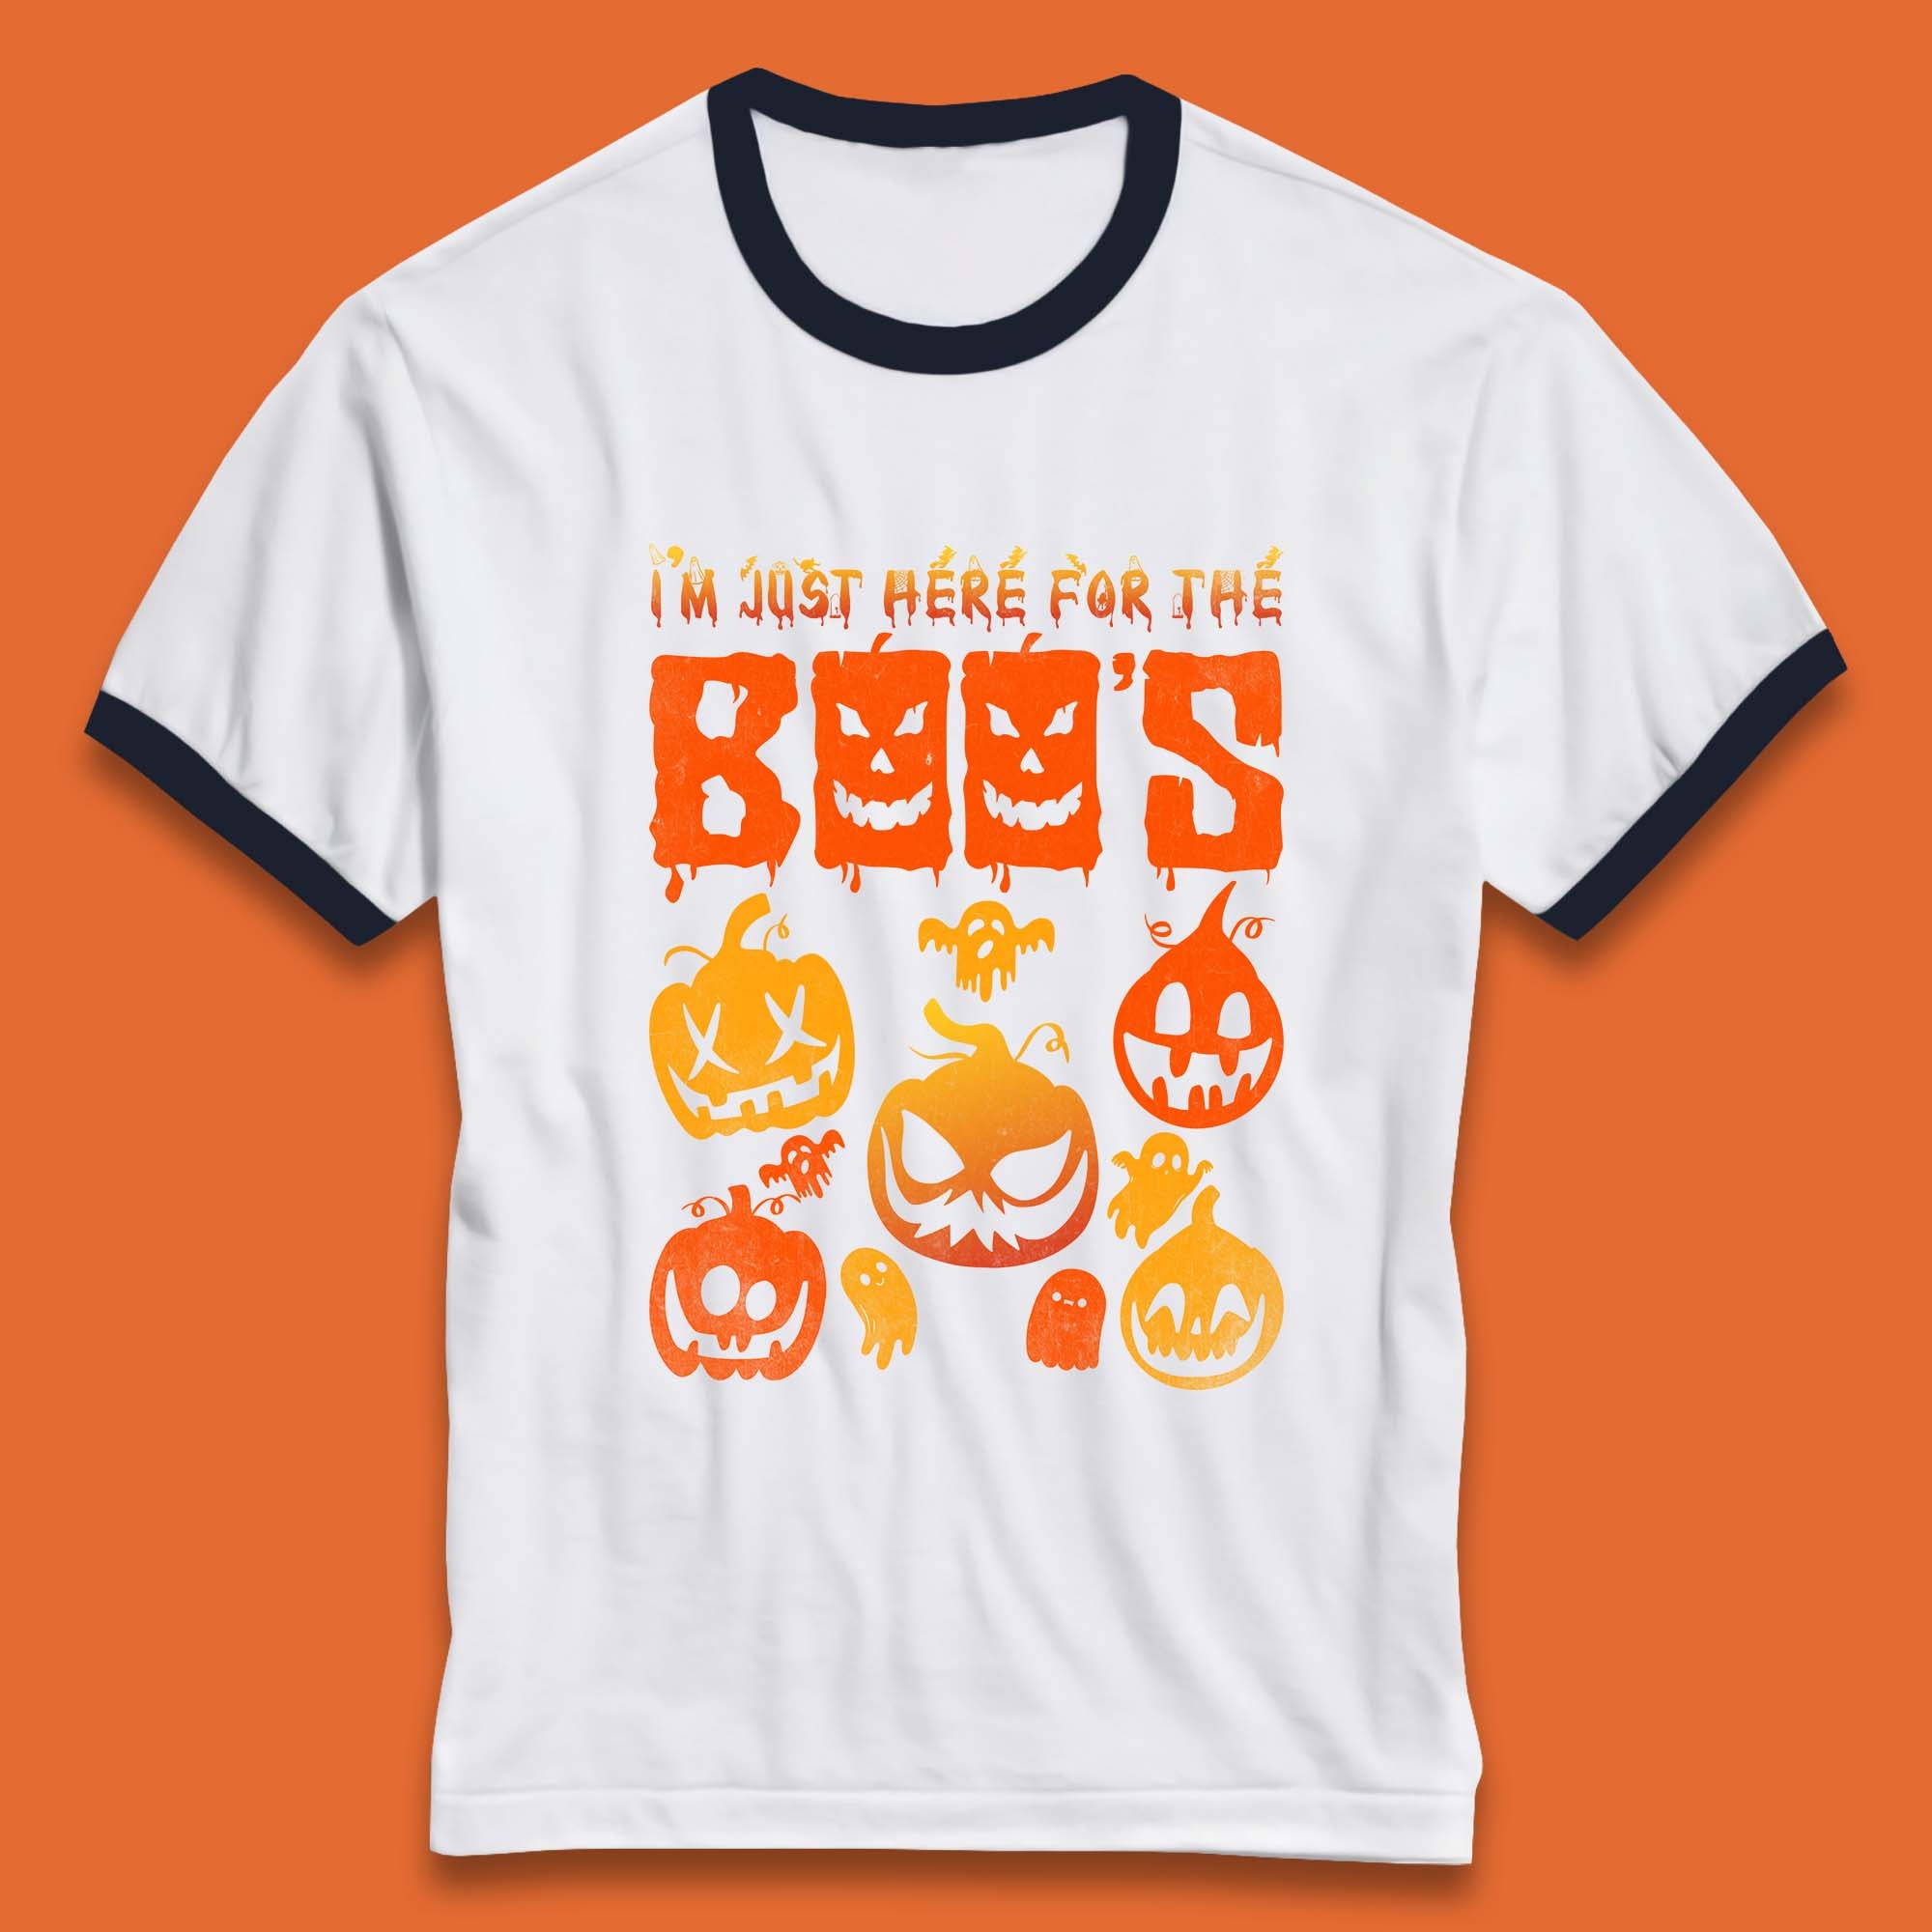 I'm Just Here For The Boos Halloween Funny Pumpkin Ghost Boos Jack-o-lantern Ringer T Shirt